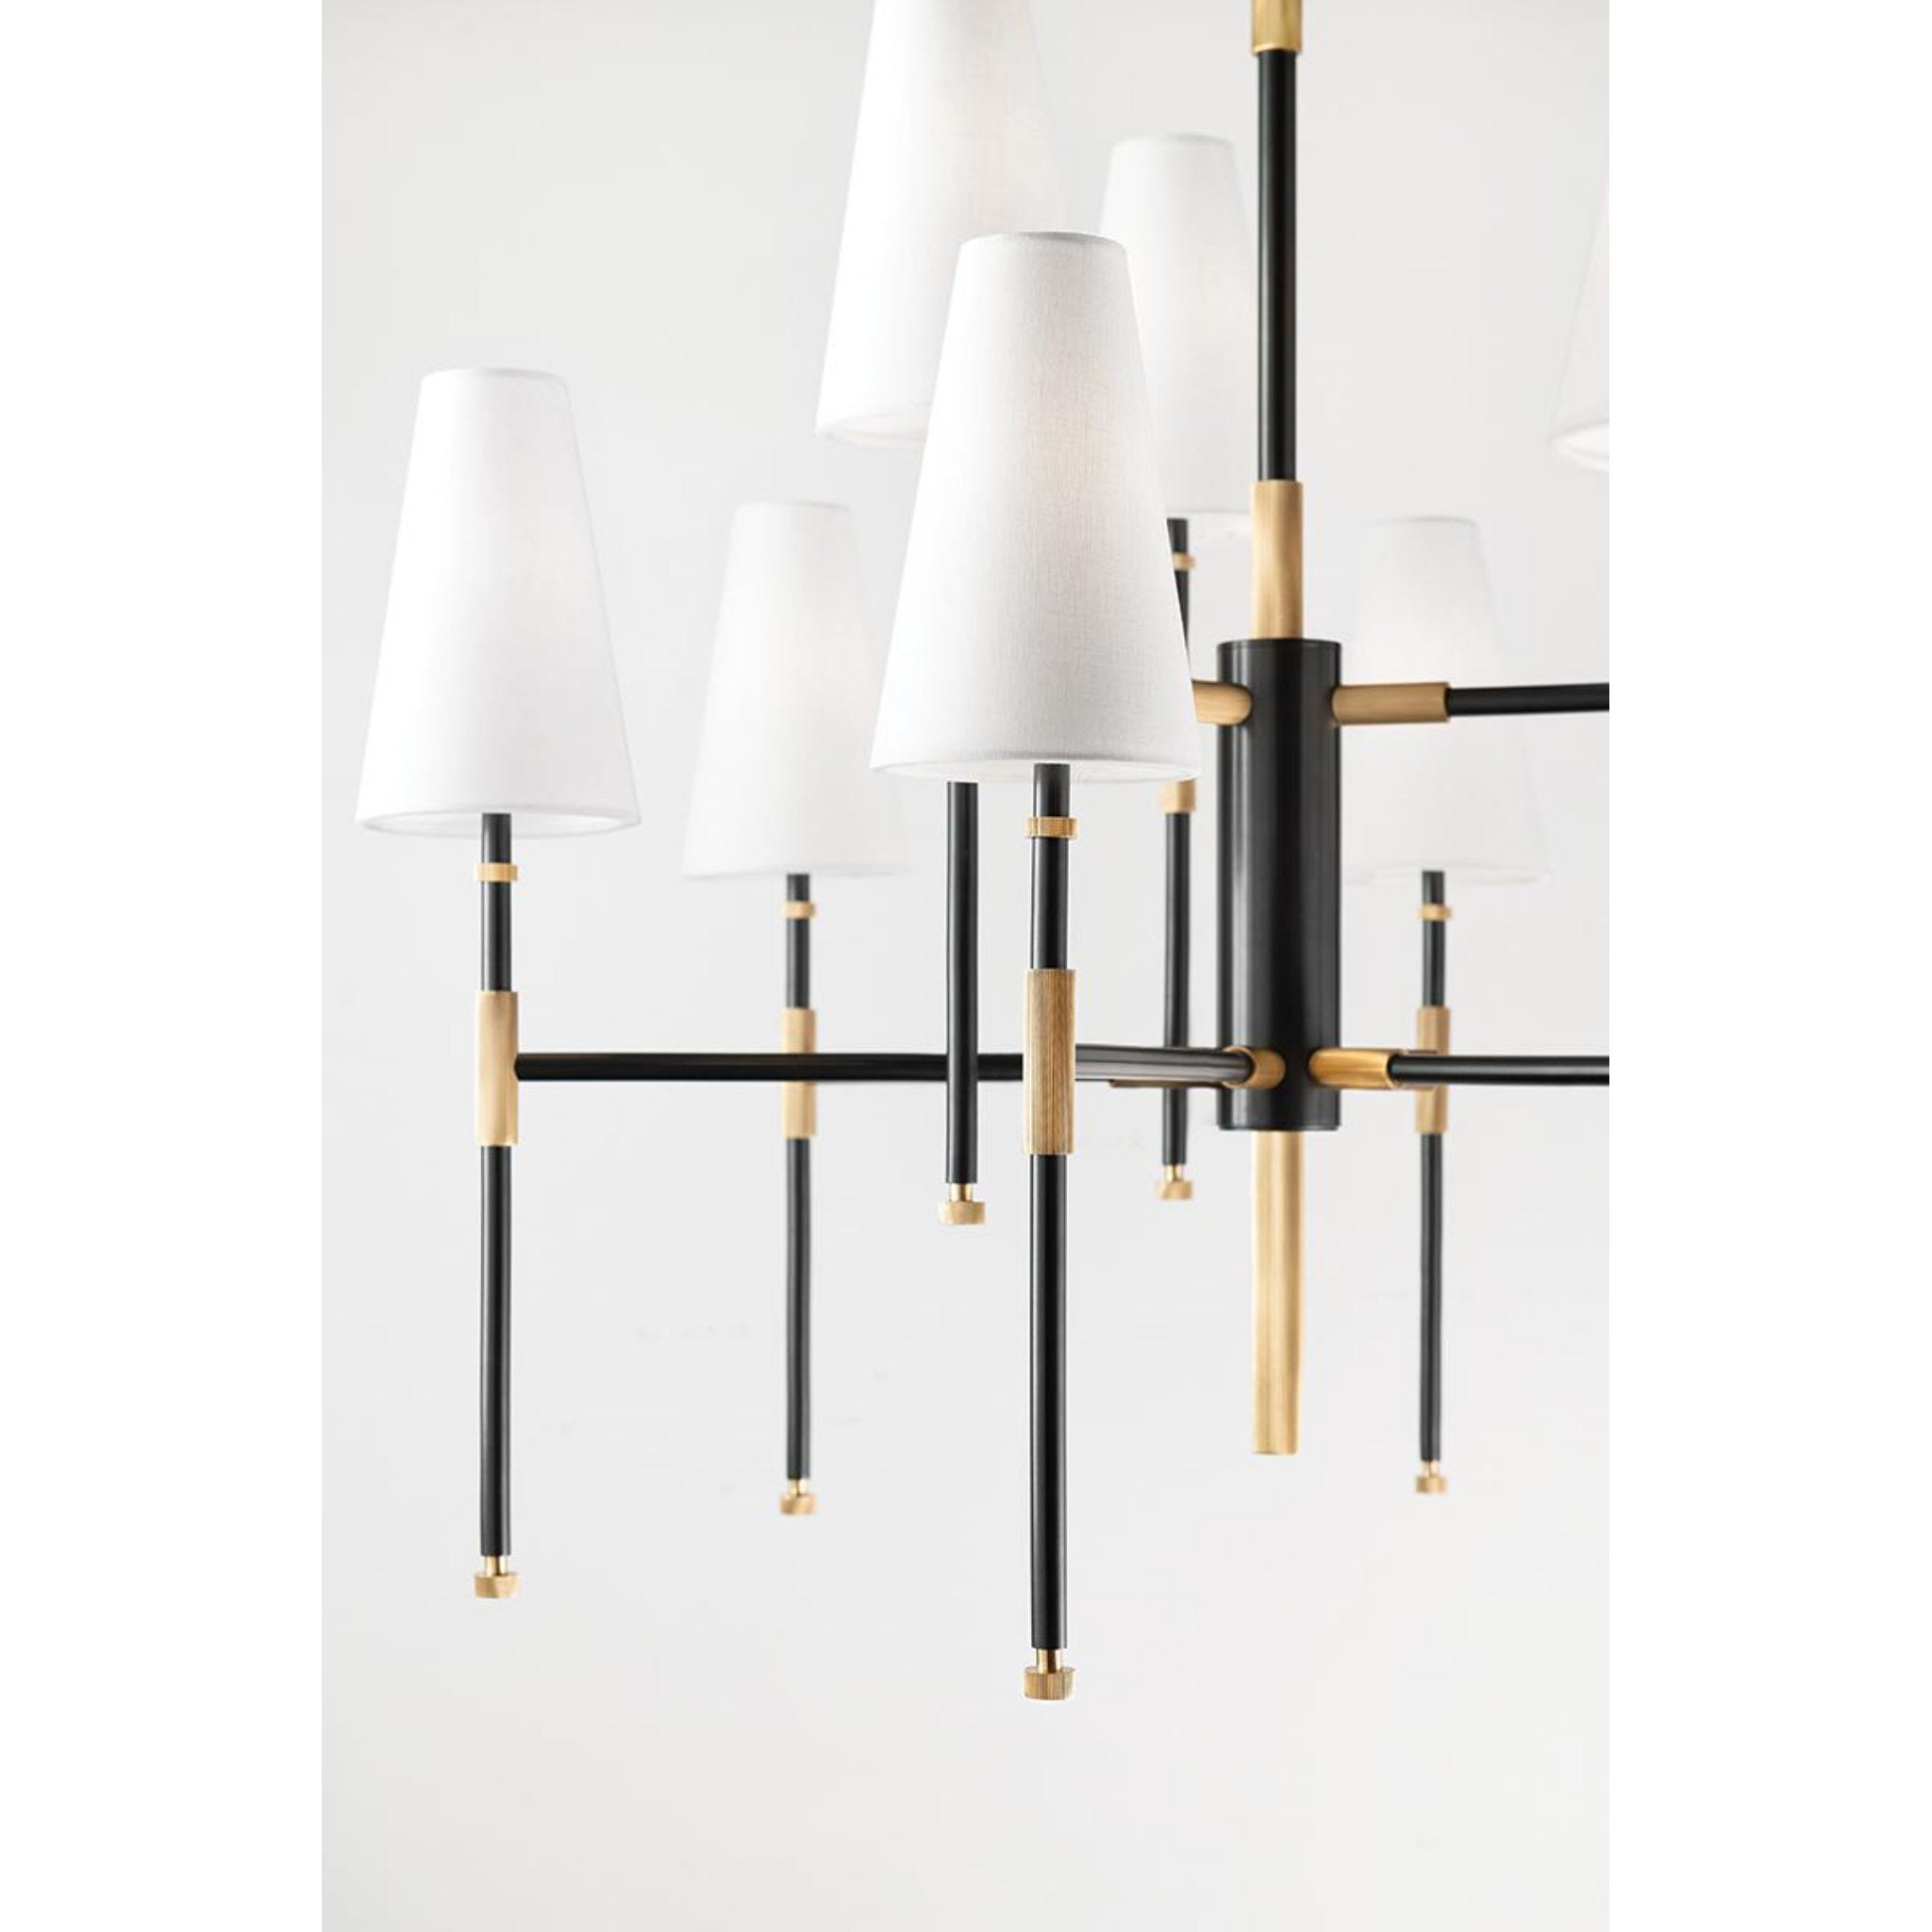 Bowery 15 Light Chandelier in Polished Nickel